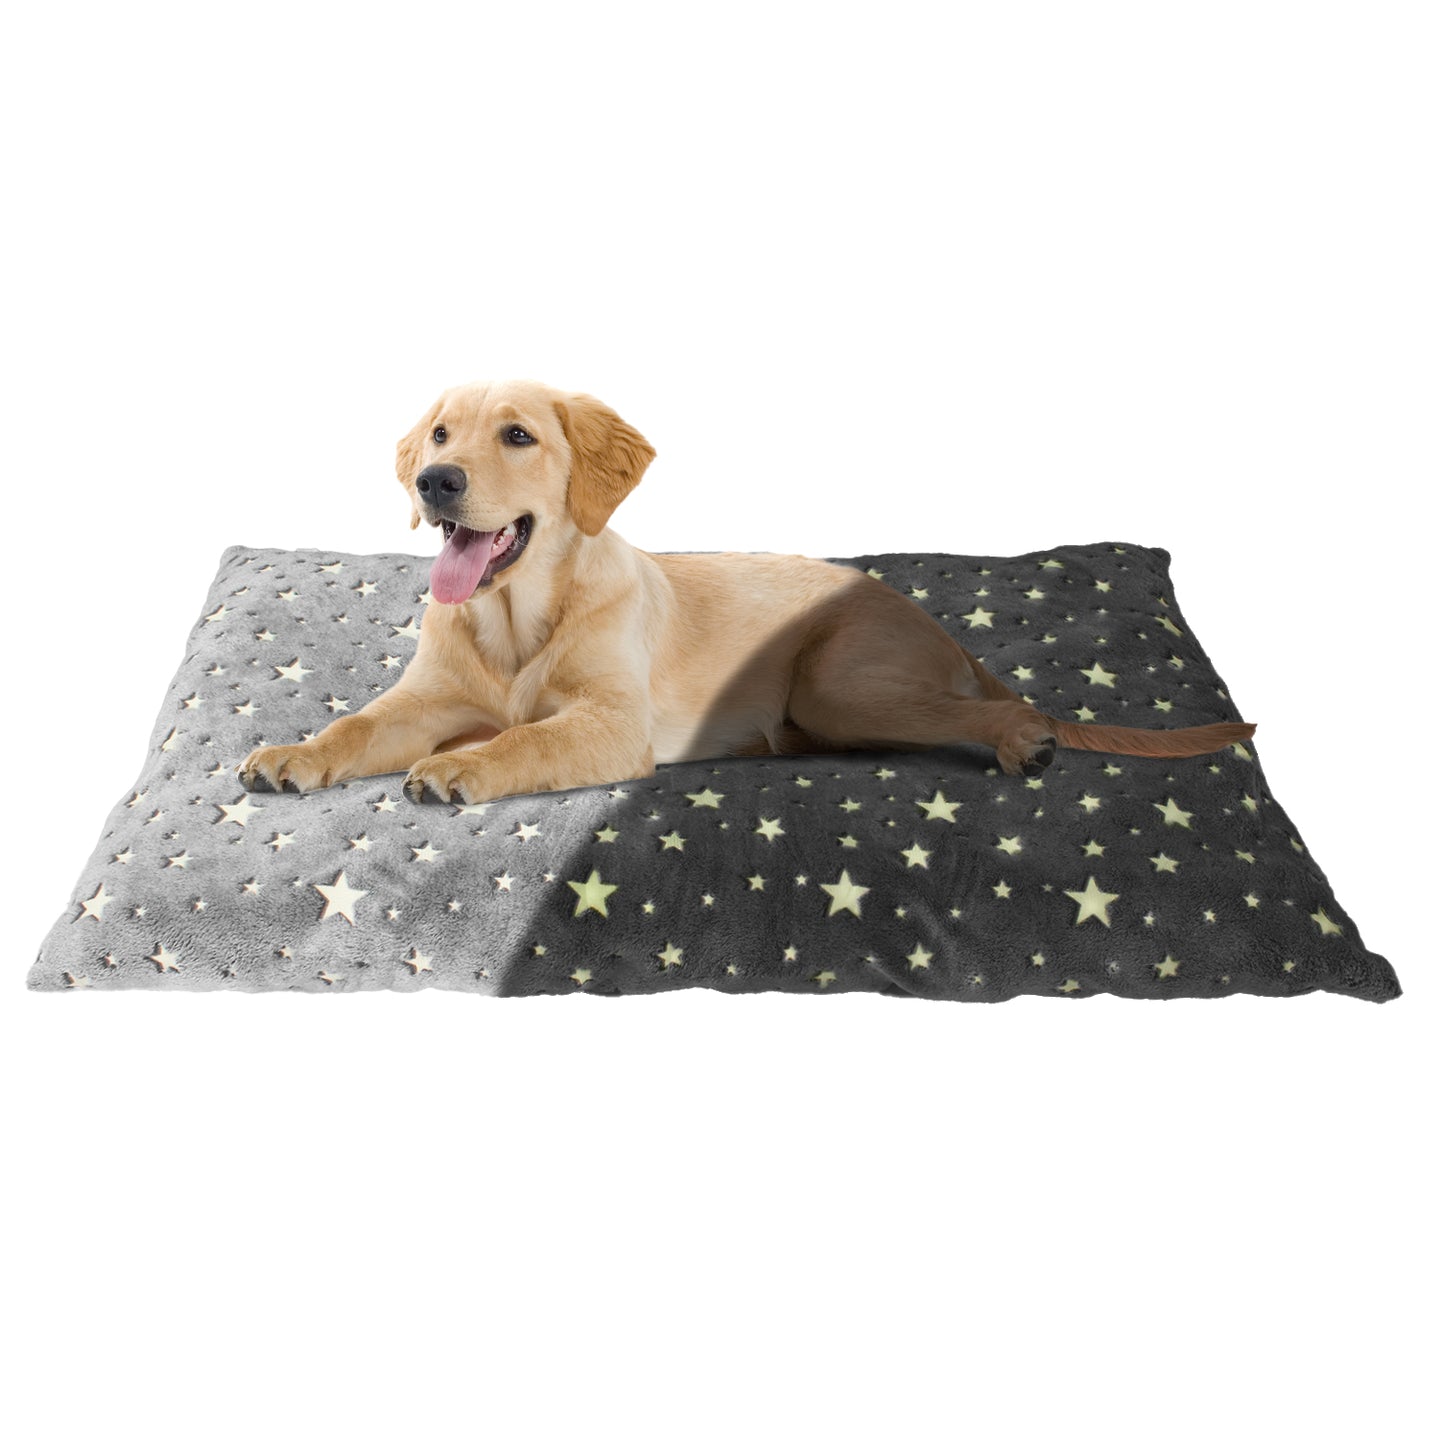 Glow in The Dark Rectangular Pet Bed, Plush Calming Orthopedic Cushion, Washable Kennel Crate Mattress Design for Dogs and Cats